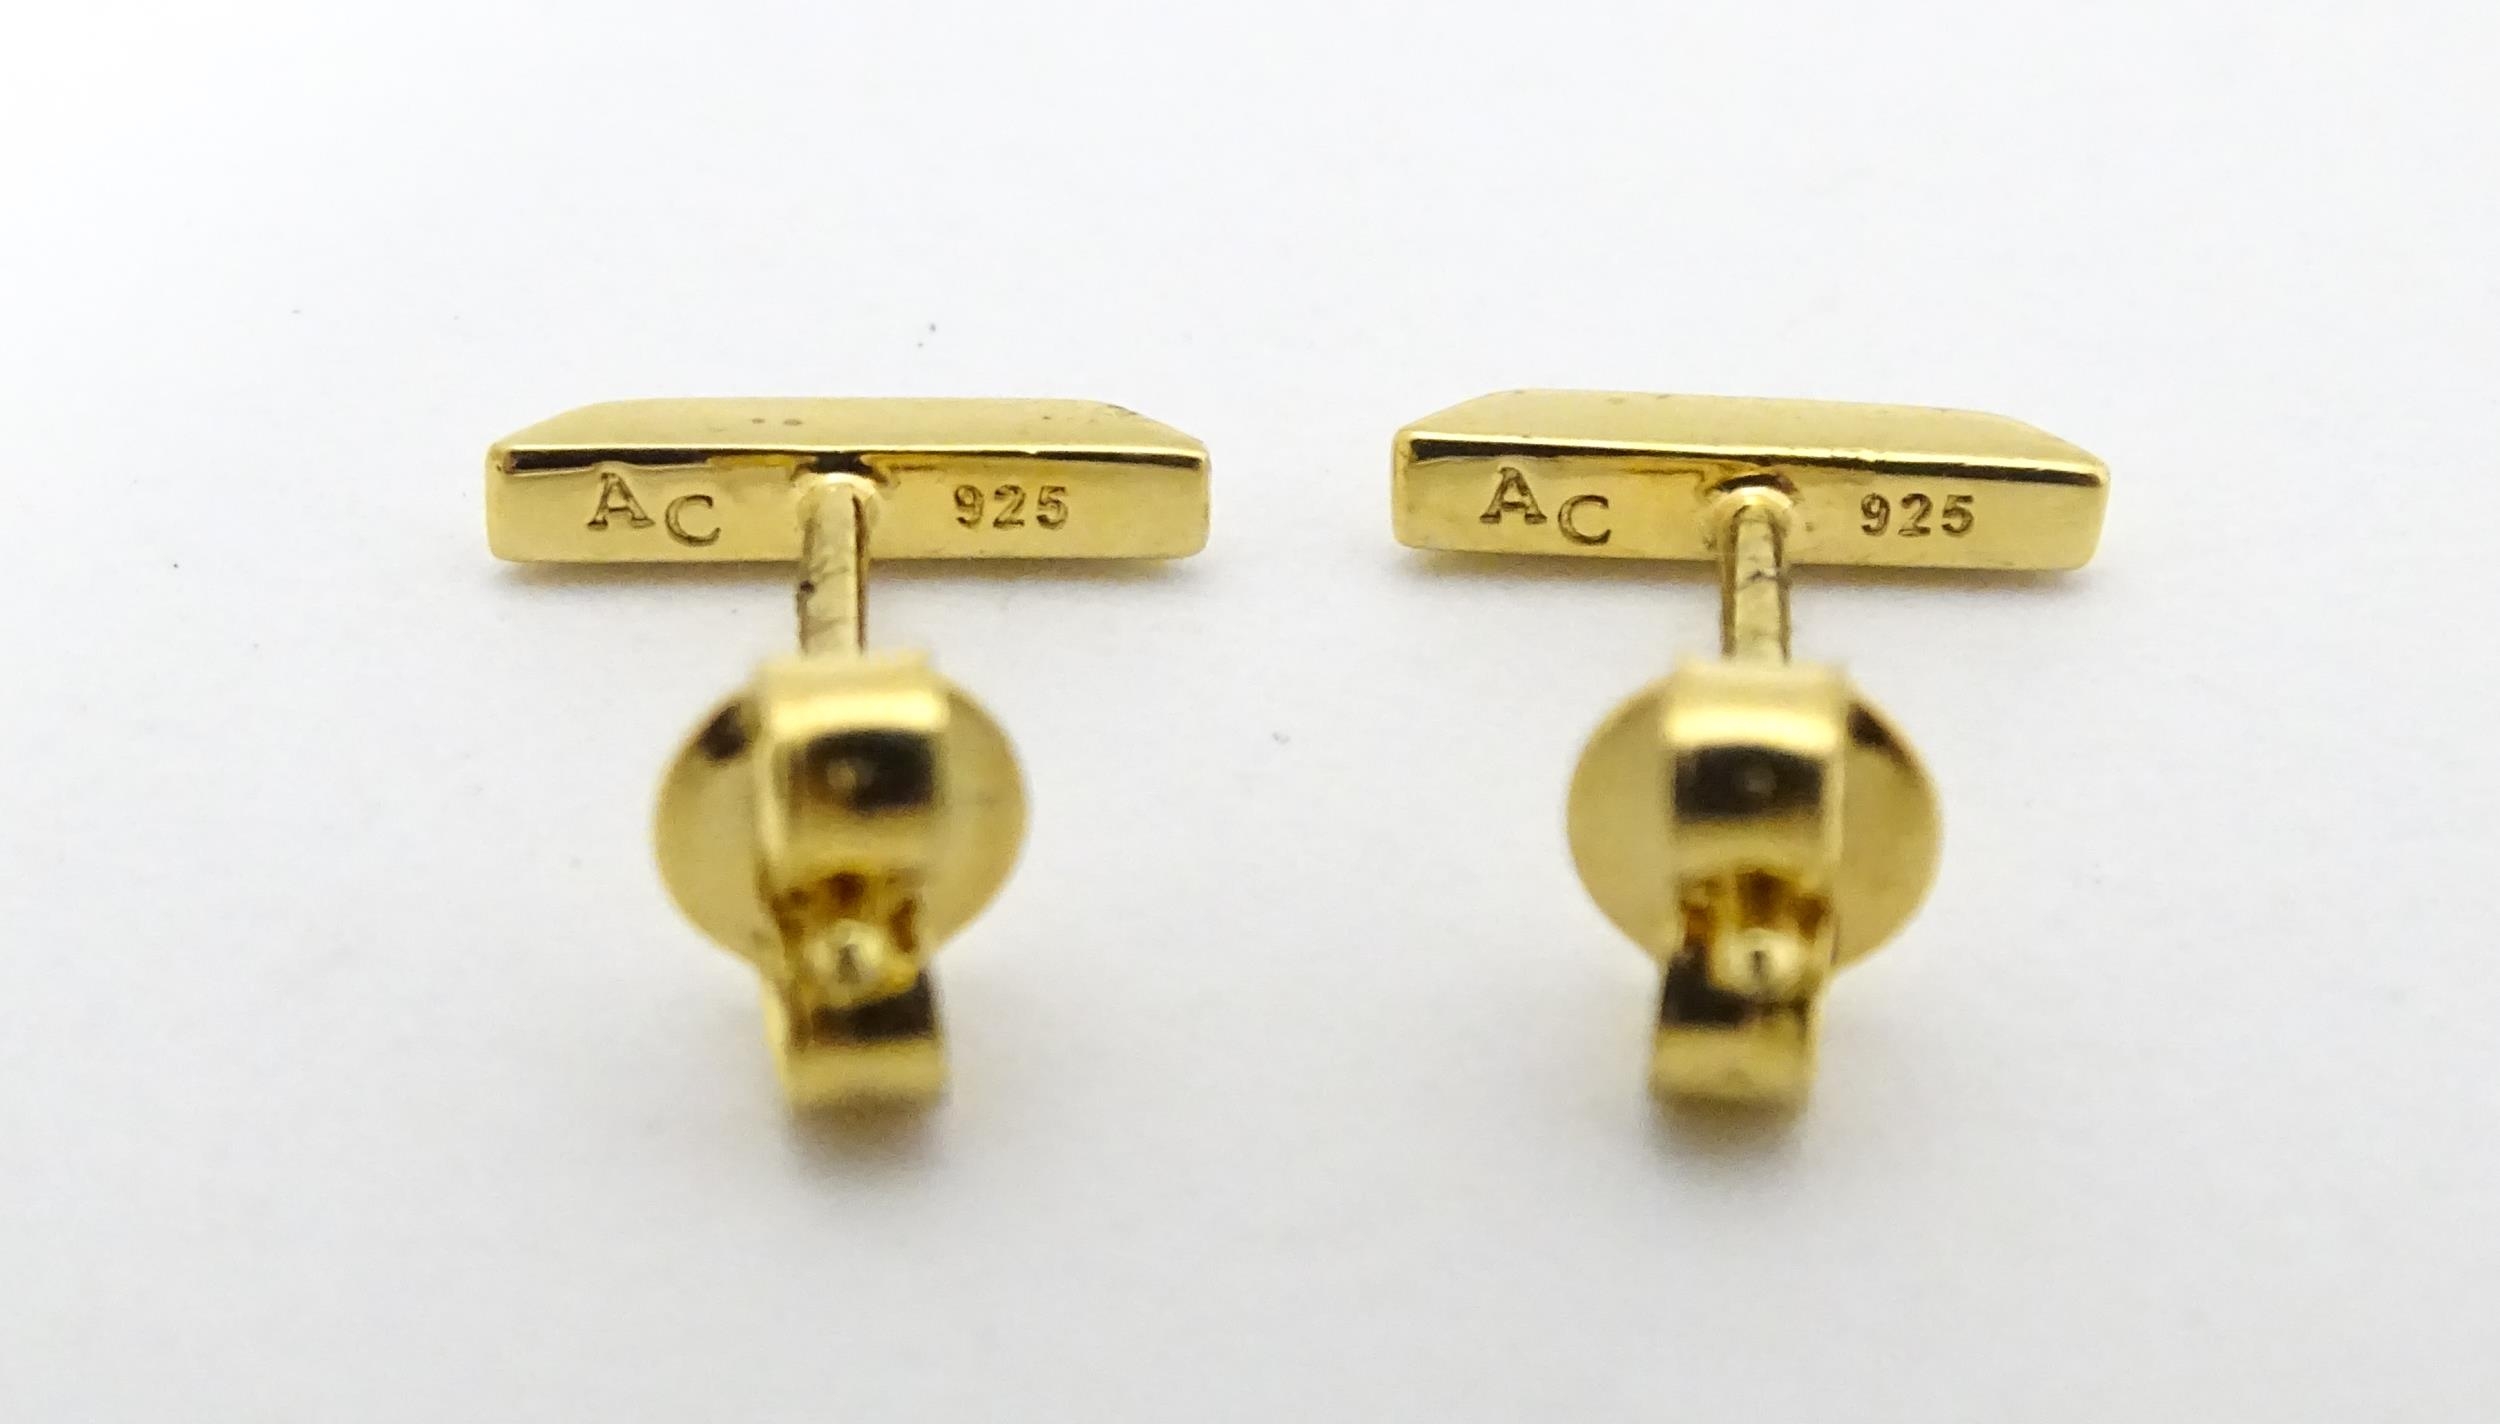 A pair of Astley Clarke 925 silver gilt stud earrings with blue enamel detail. Approx. 1/4" wide - Image 7 of 8